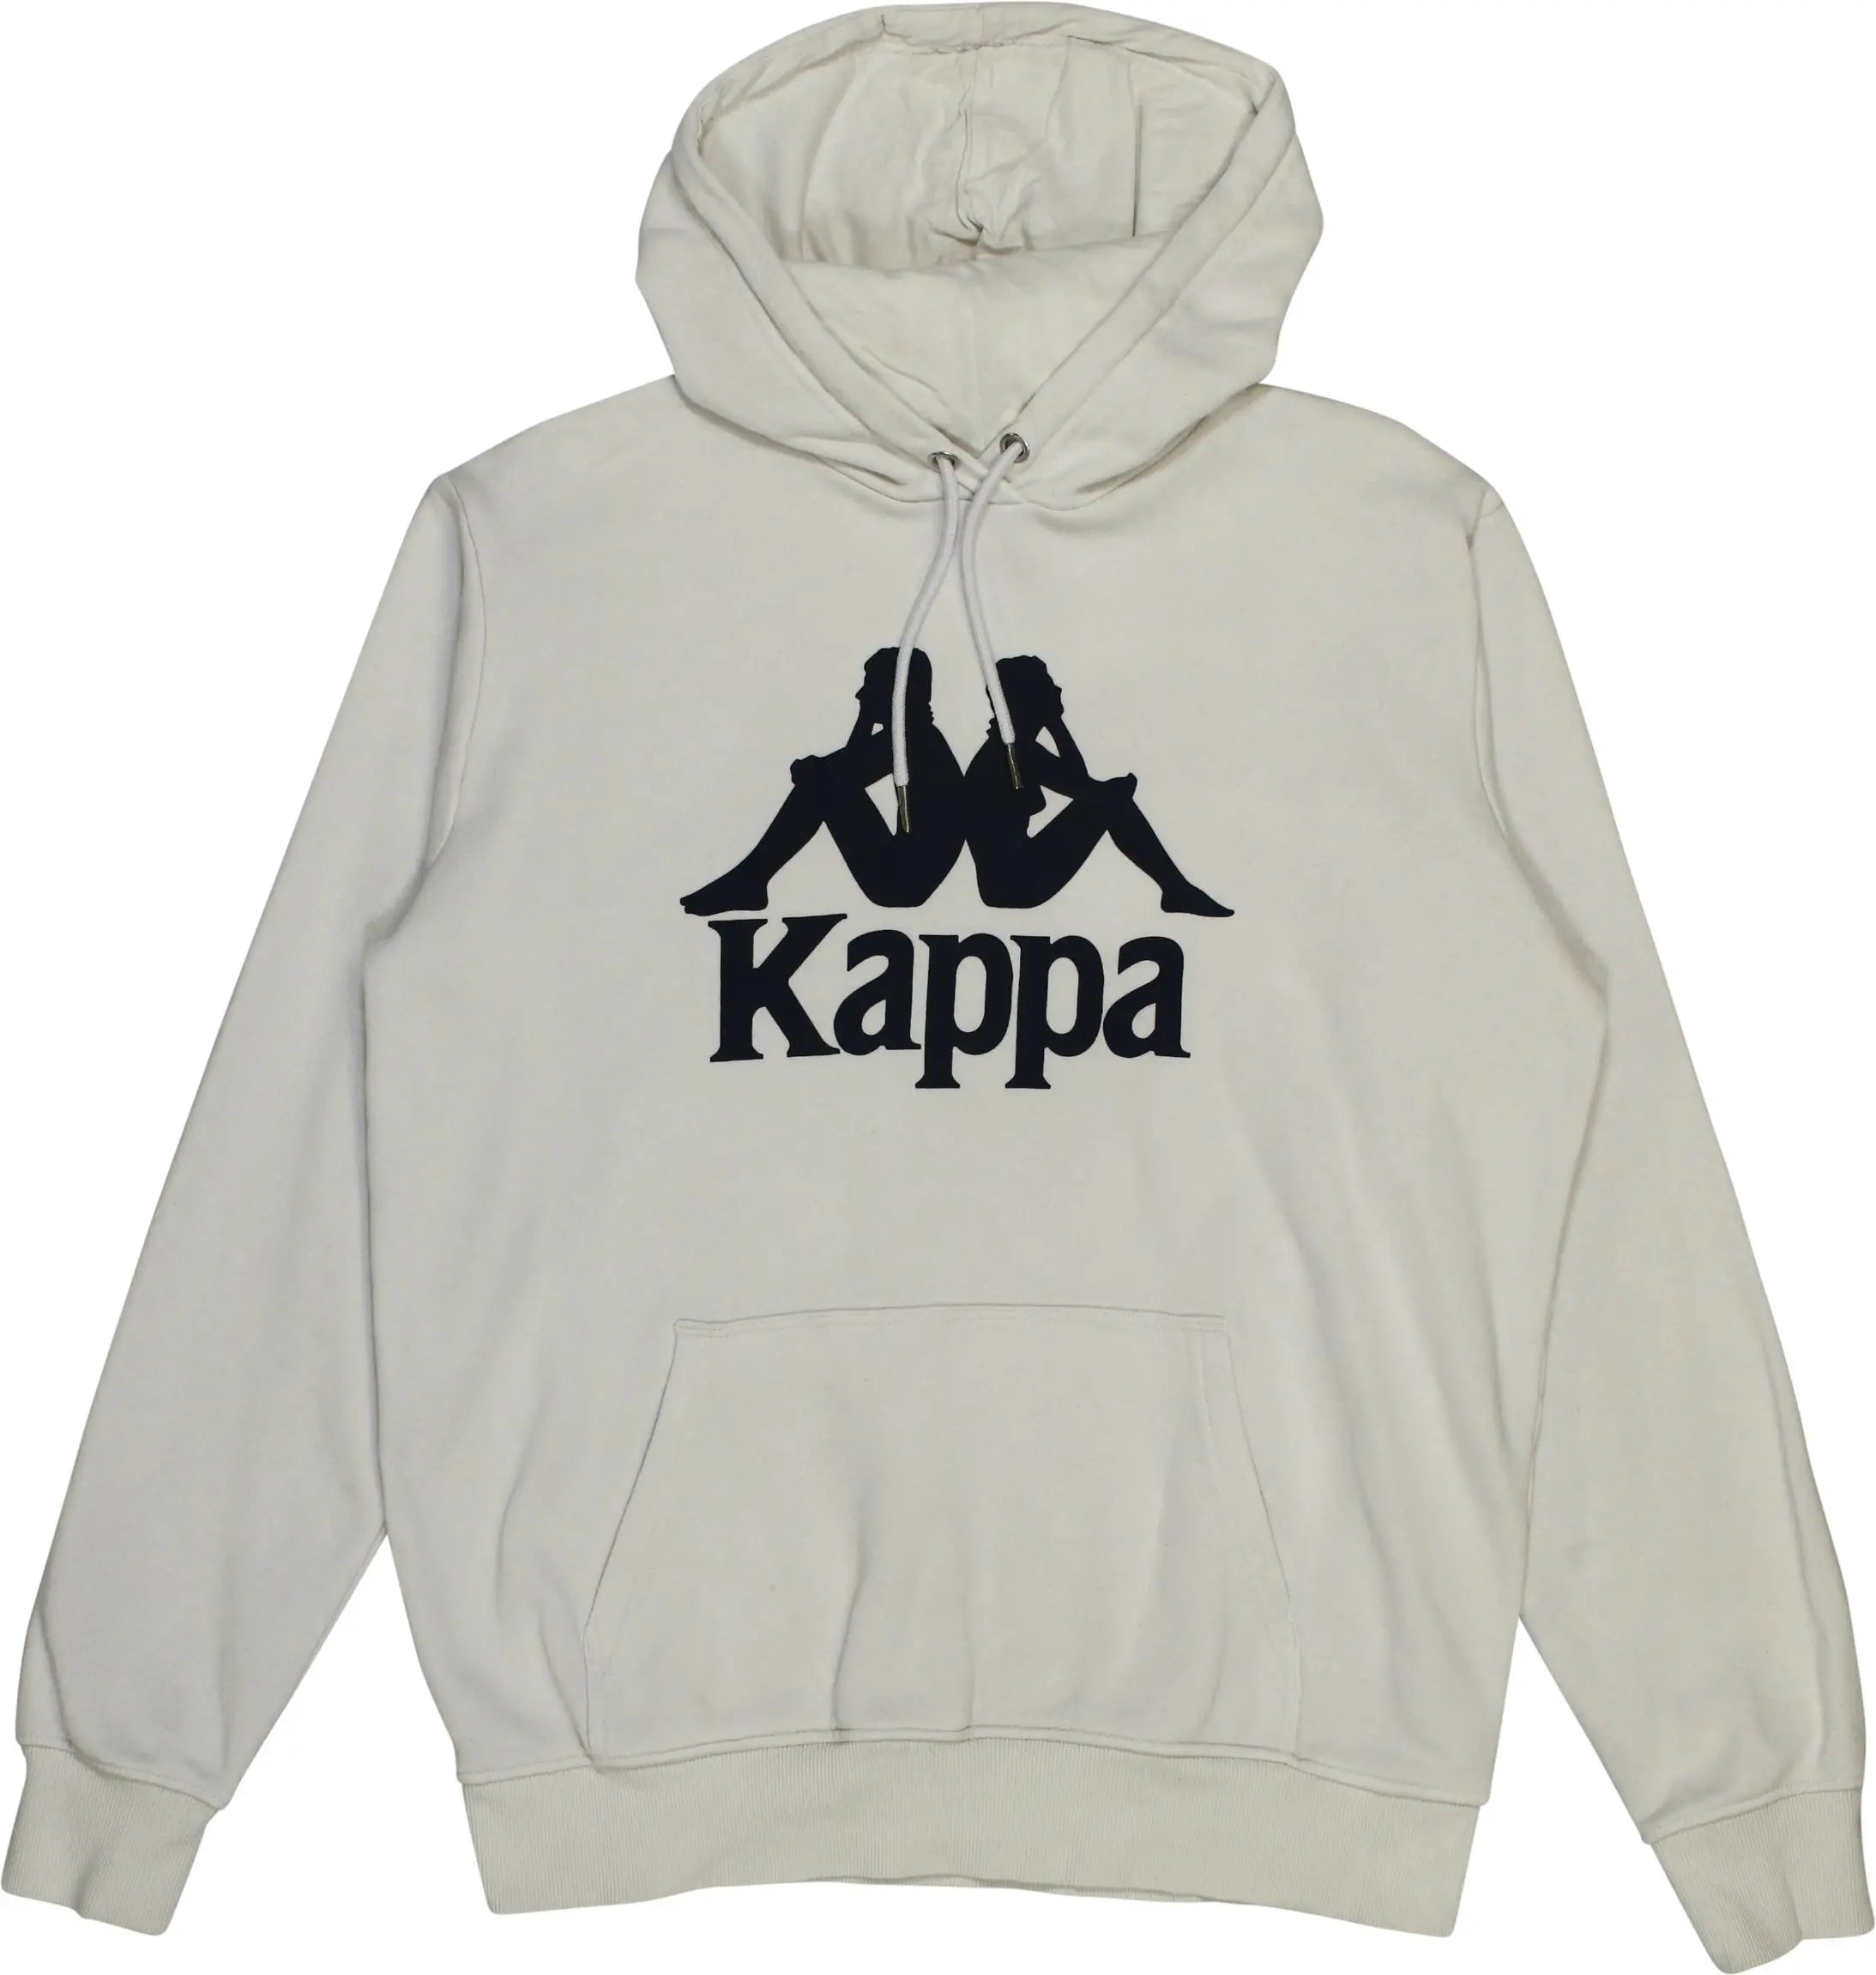 Kappa - White Hoodie by Kappa- ThriftTale.com - Vintage and second handclothing